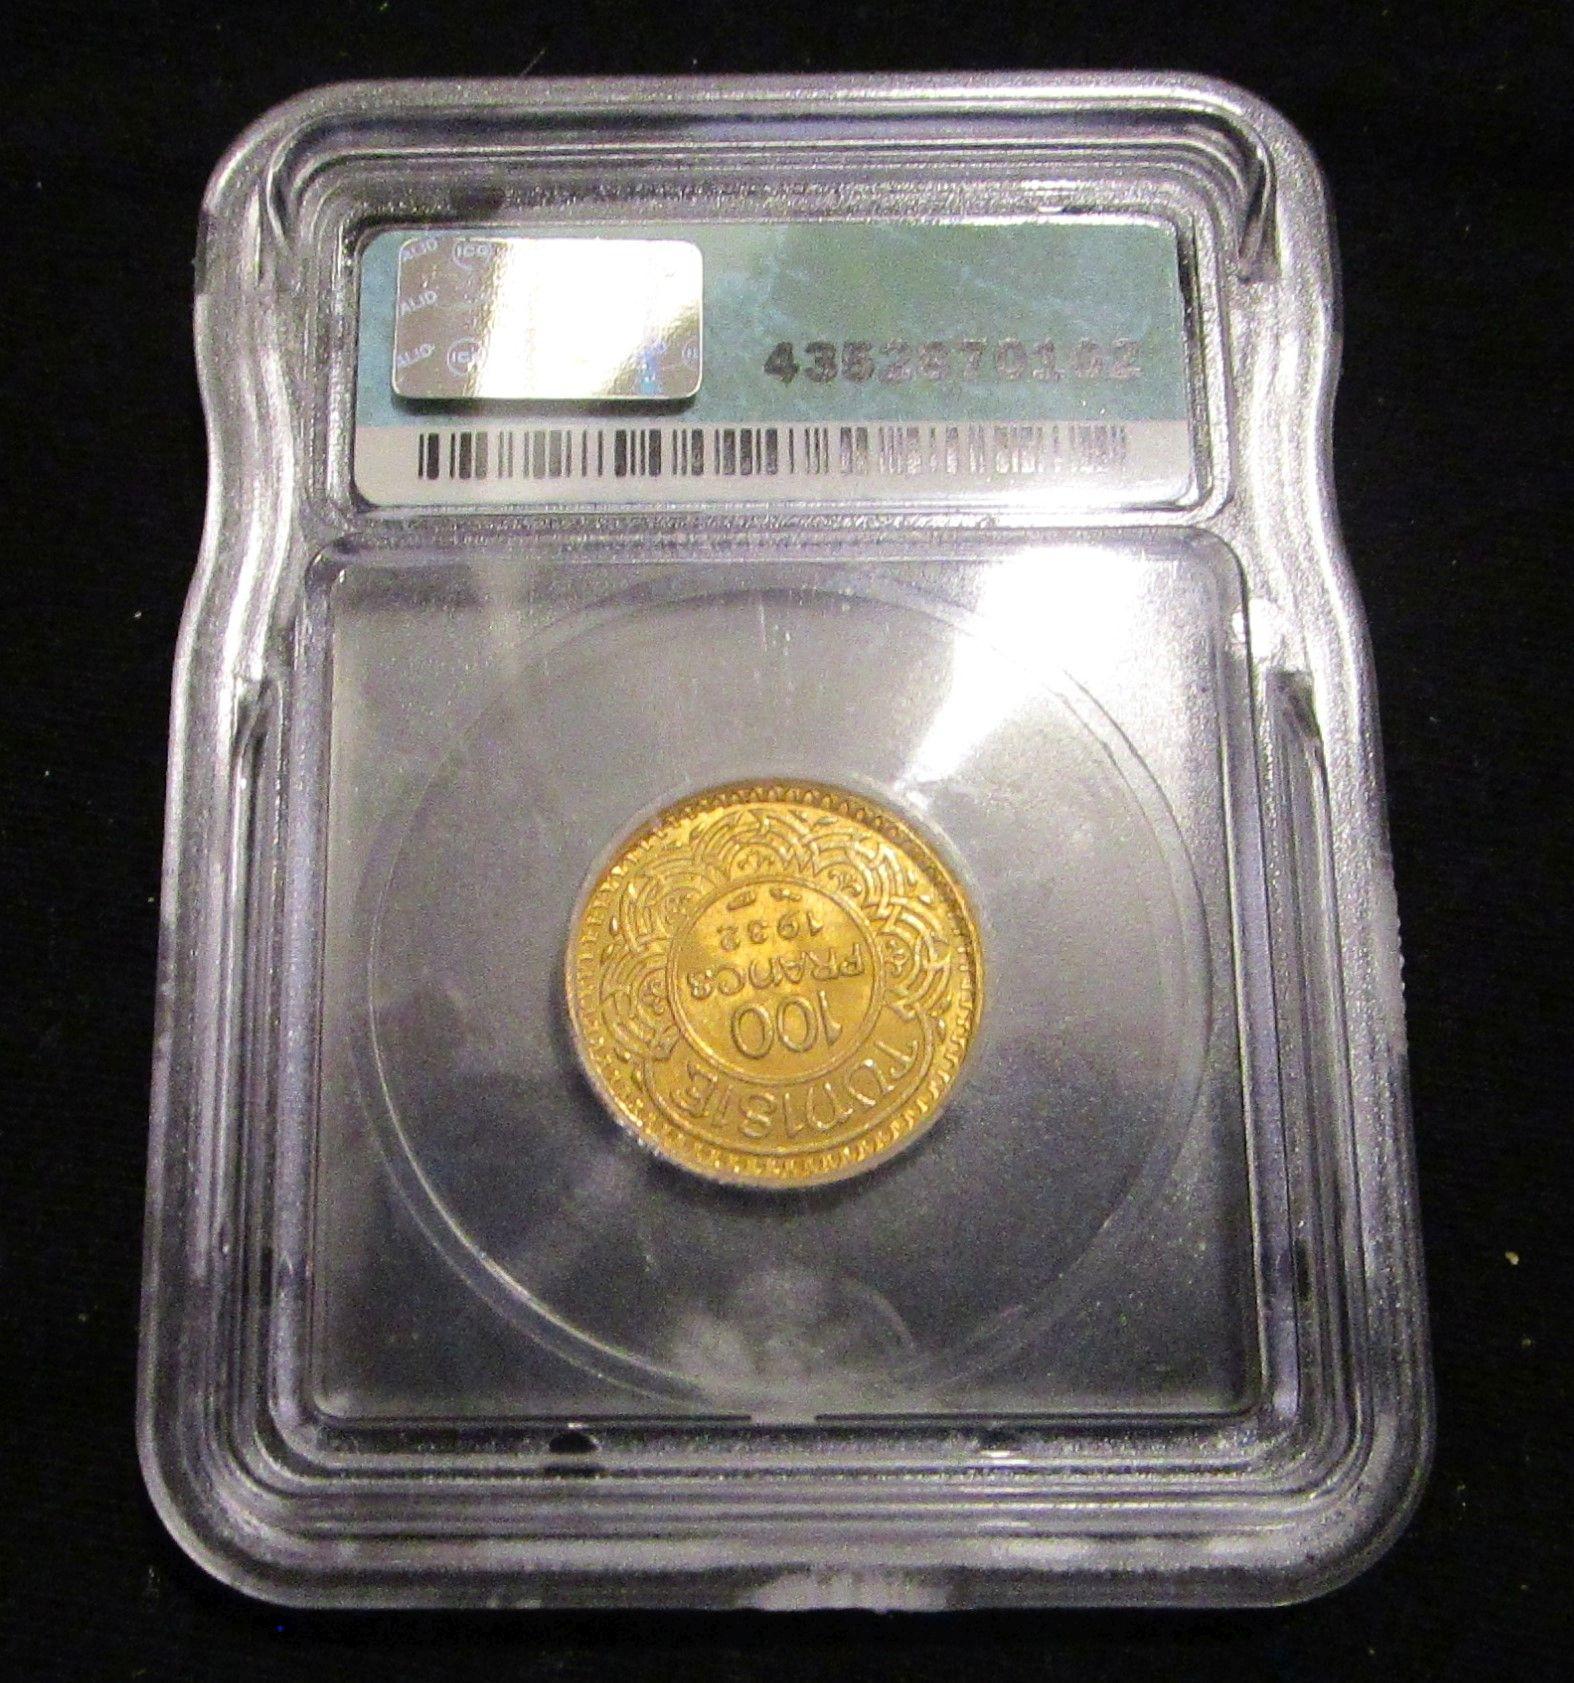 1932 Tunisia 100 Franks Gold - Graded MS65 by ICG